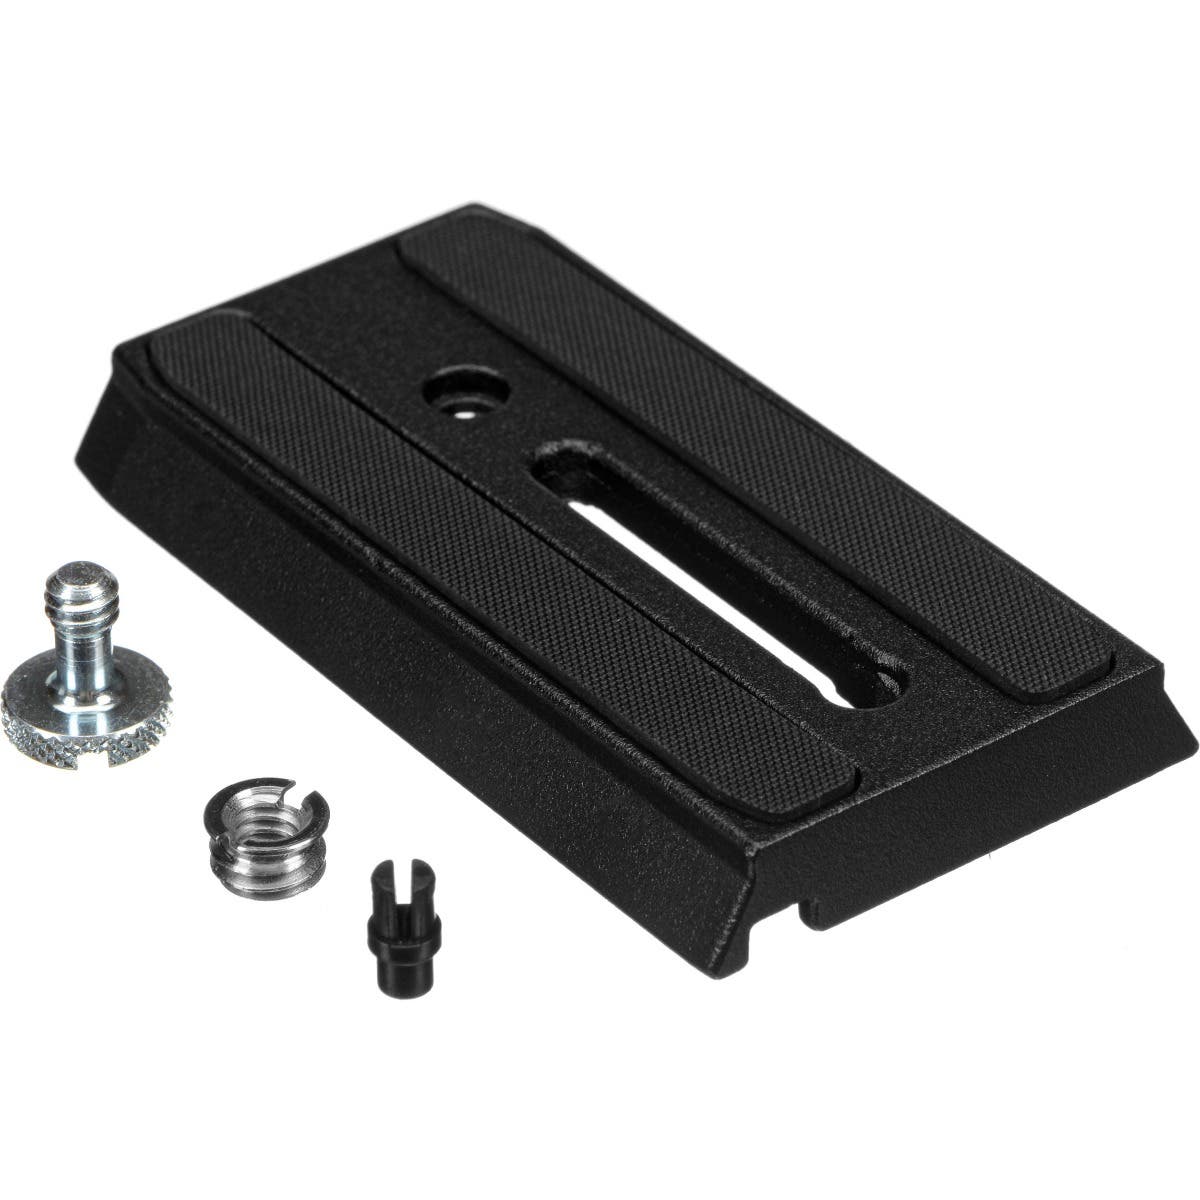 Manfrotto 501PL Sliding Quick-Release Plate with 1/4 inch 20 Screw